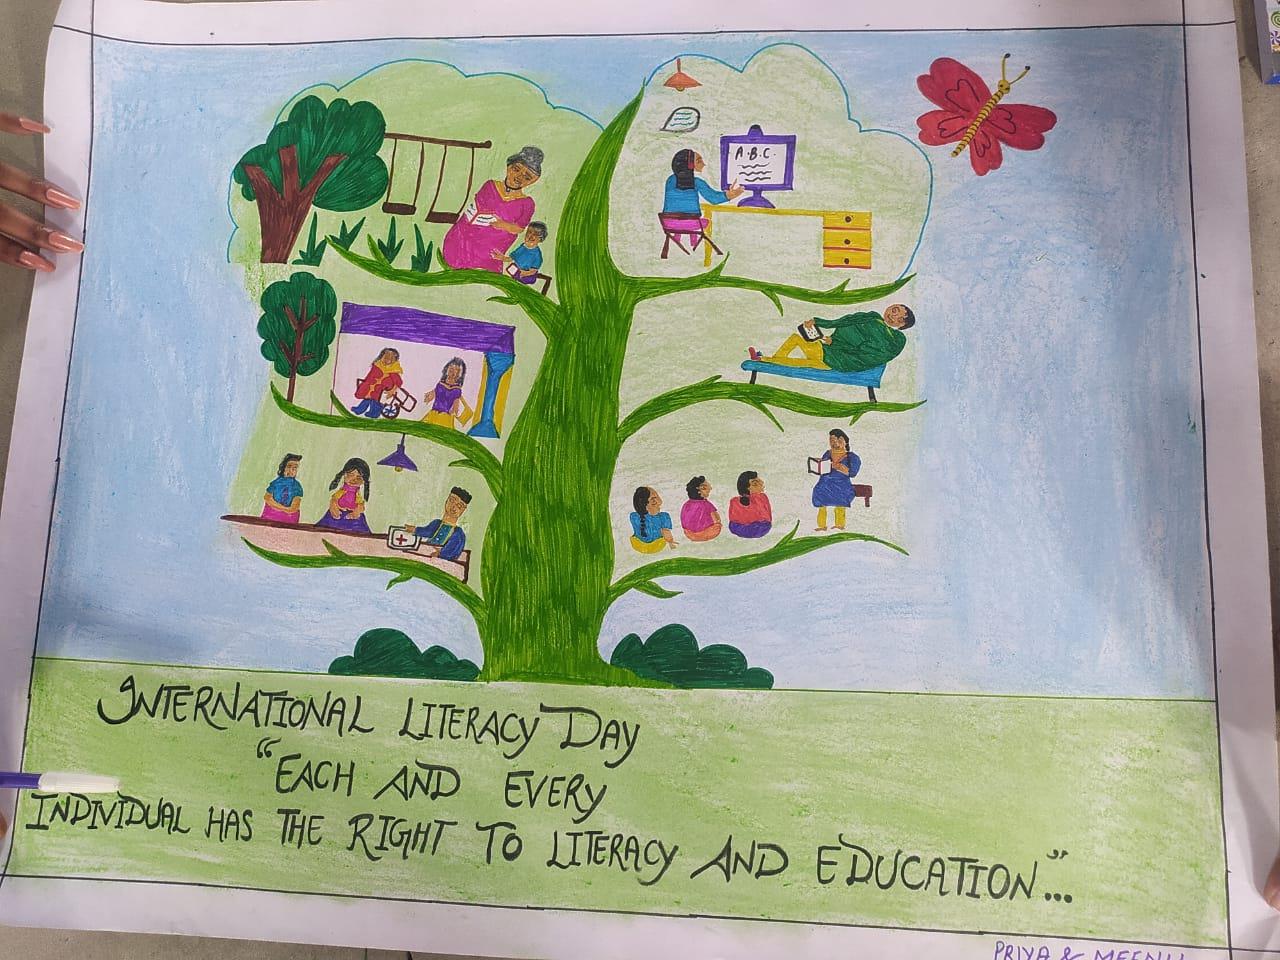 International Literacy Day Reading Learning Knowledge Drawing Illustration  Poster Illustration | PSD Free Download - Pikbest